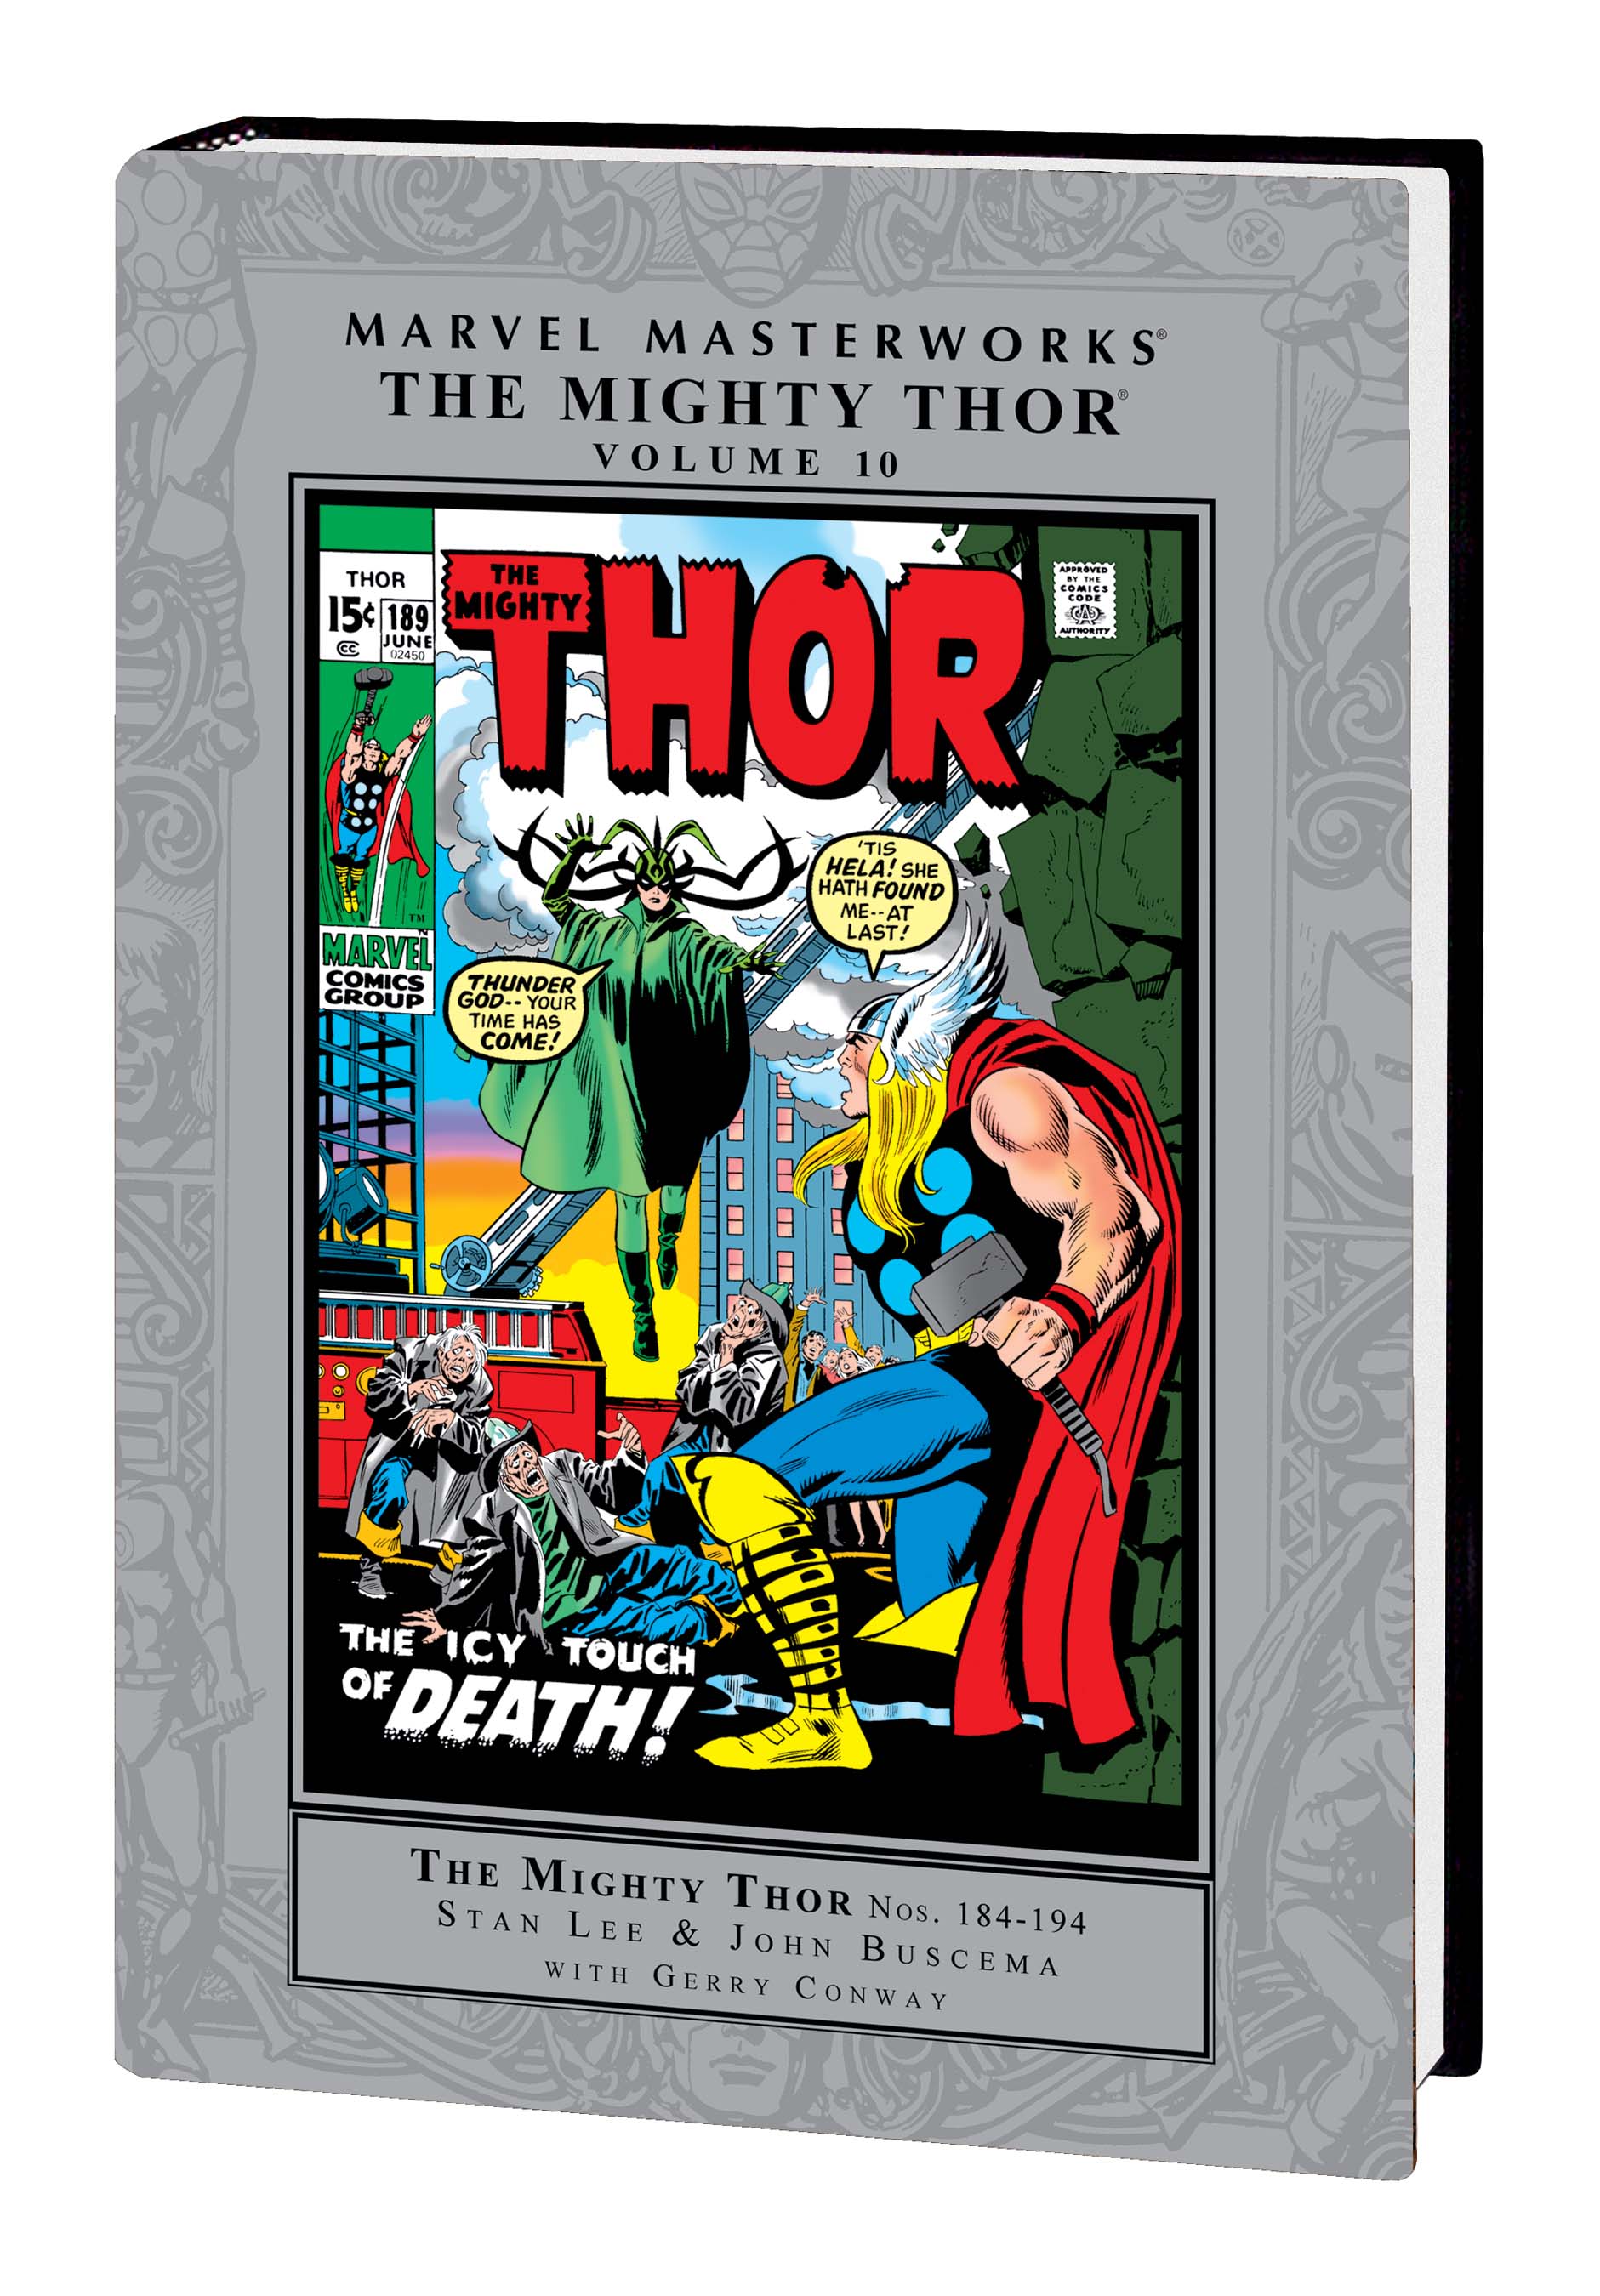 Marvel Masterworks: The Mighty Thor (Hardcover)